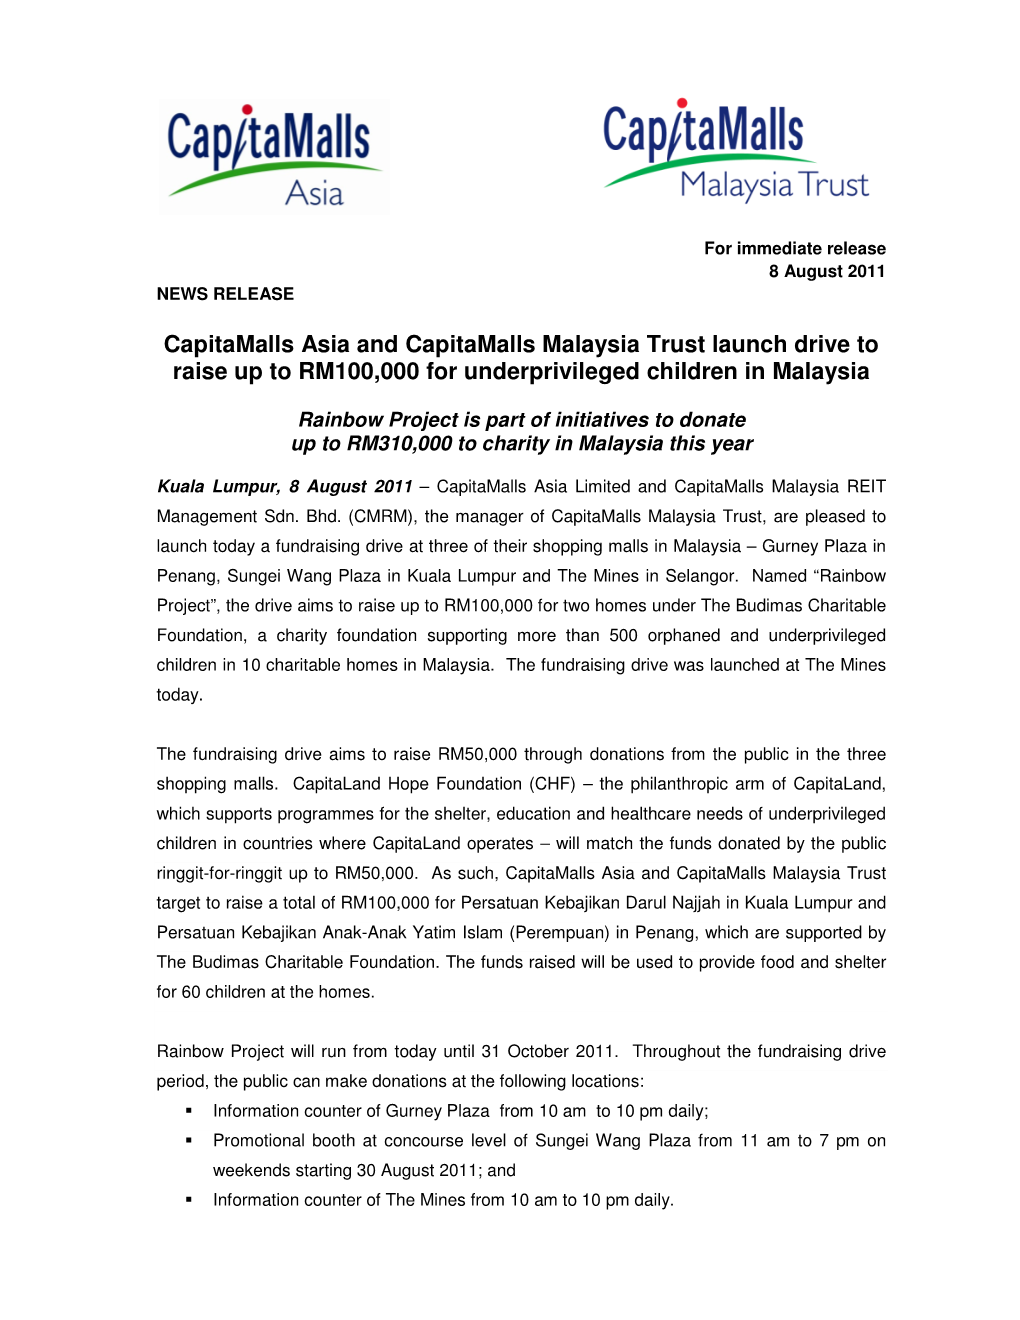 Capitamalls Asia and Capitamalls Malaysia Trust Launch Drive to Raise up to RM100,000 for Underprivileged Children in Malaysia